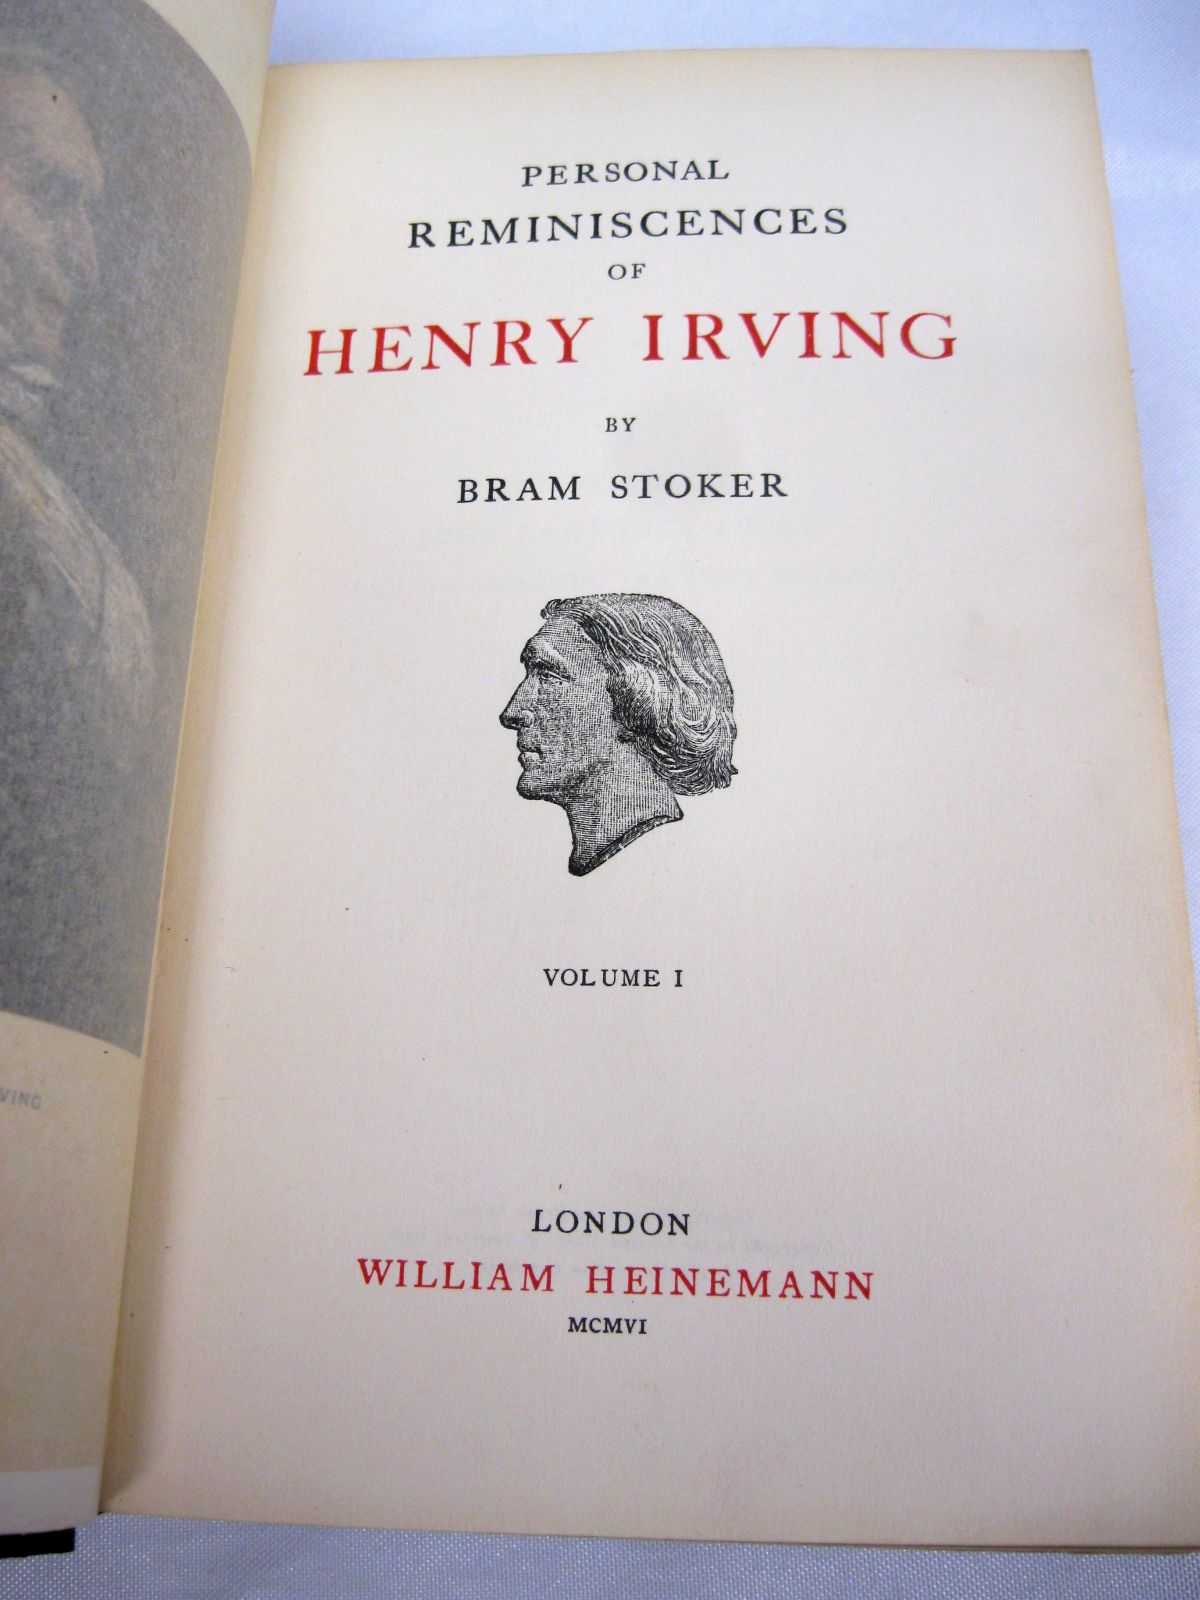 Personal Reminiscences of Henry Irving by Bram Stoker - Extra Illustrated